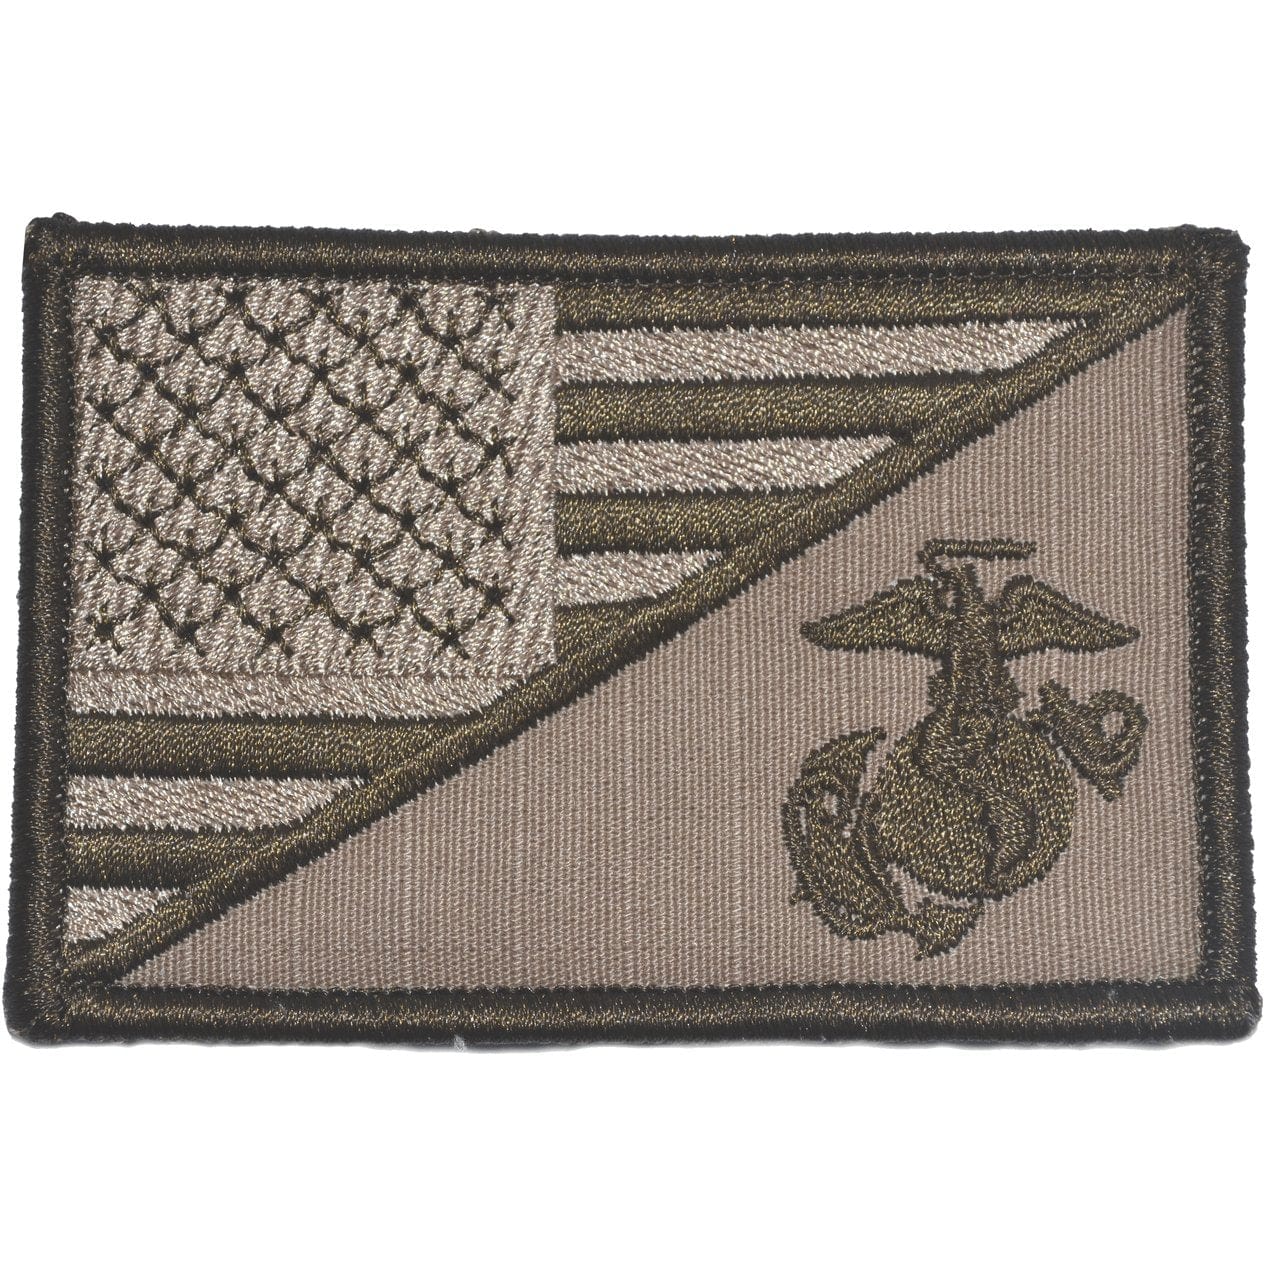 Tactical Gear Junkie Patches Coyote Brown USMC EGA USA Flag - 2.25x3.5 Patch